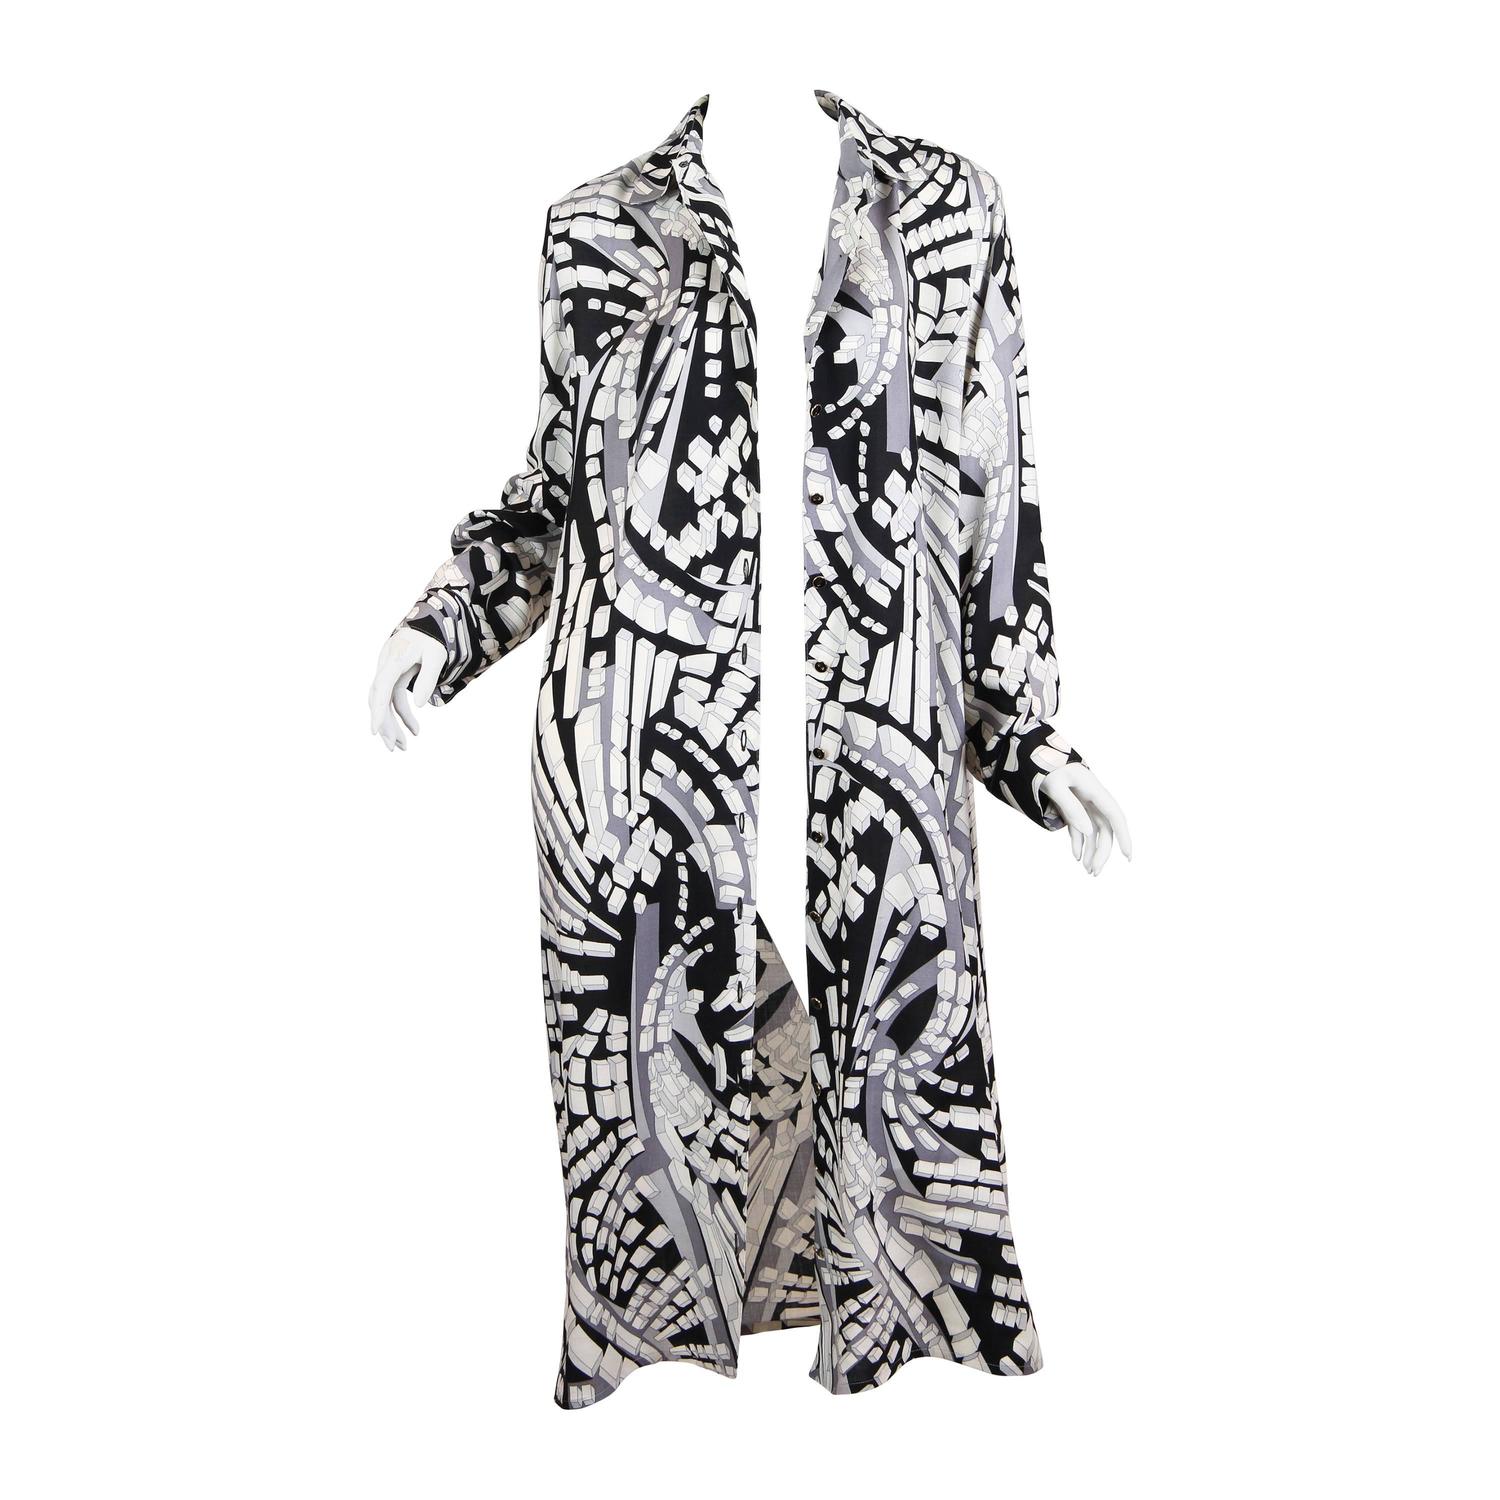 Bessi Shirtdress Duster For Sale at 1stdibs